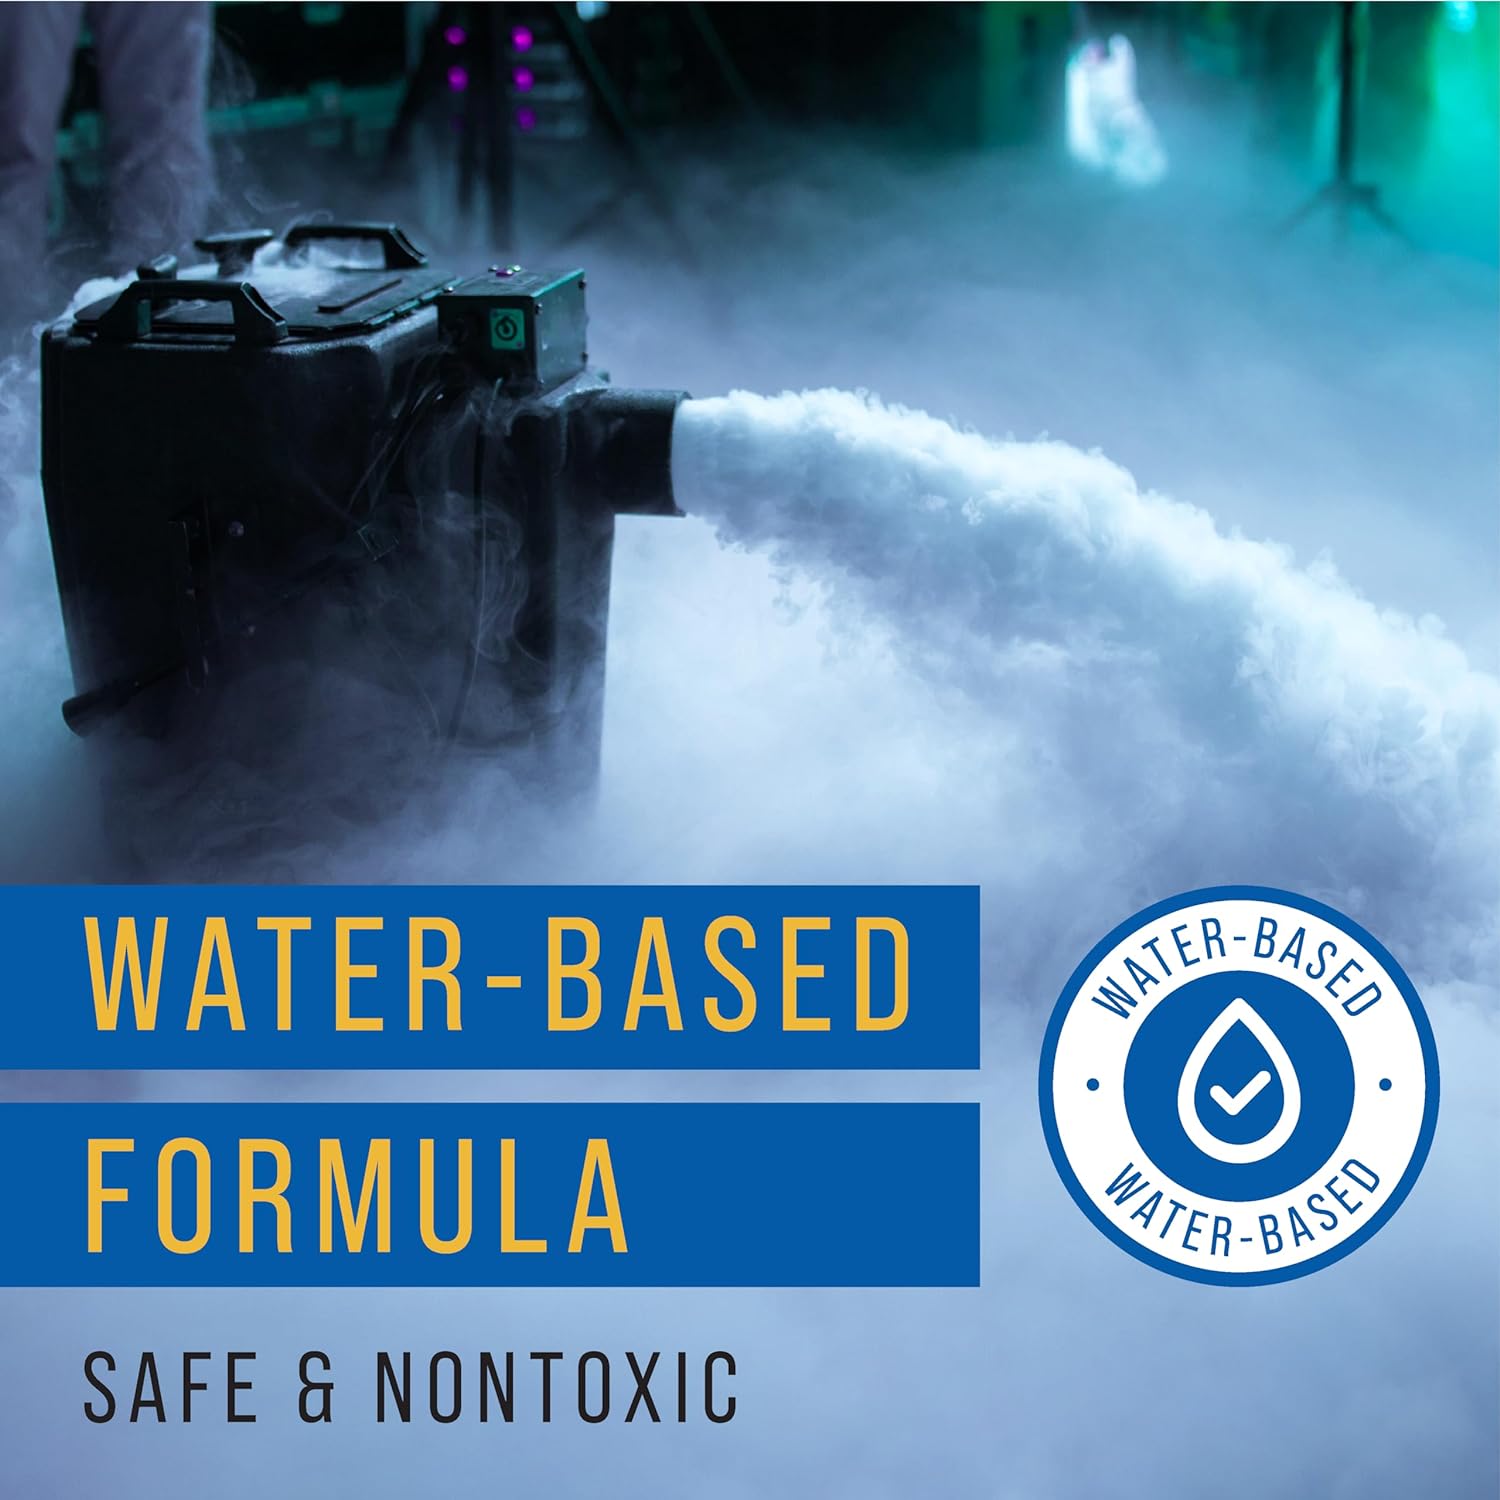 FOGGSTER 1 Gallon High Density Fog Juice for Foggers | Long Lasting Water-Based Fluid Compatible w/ 700W+ Machines